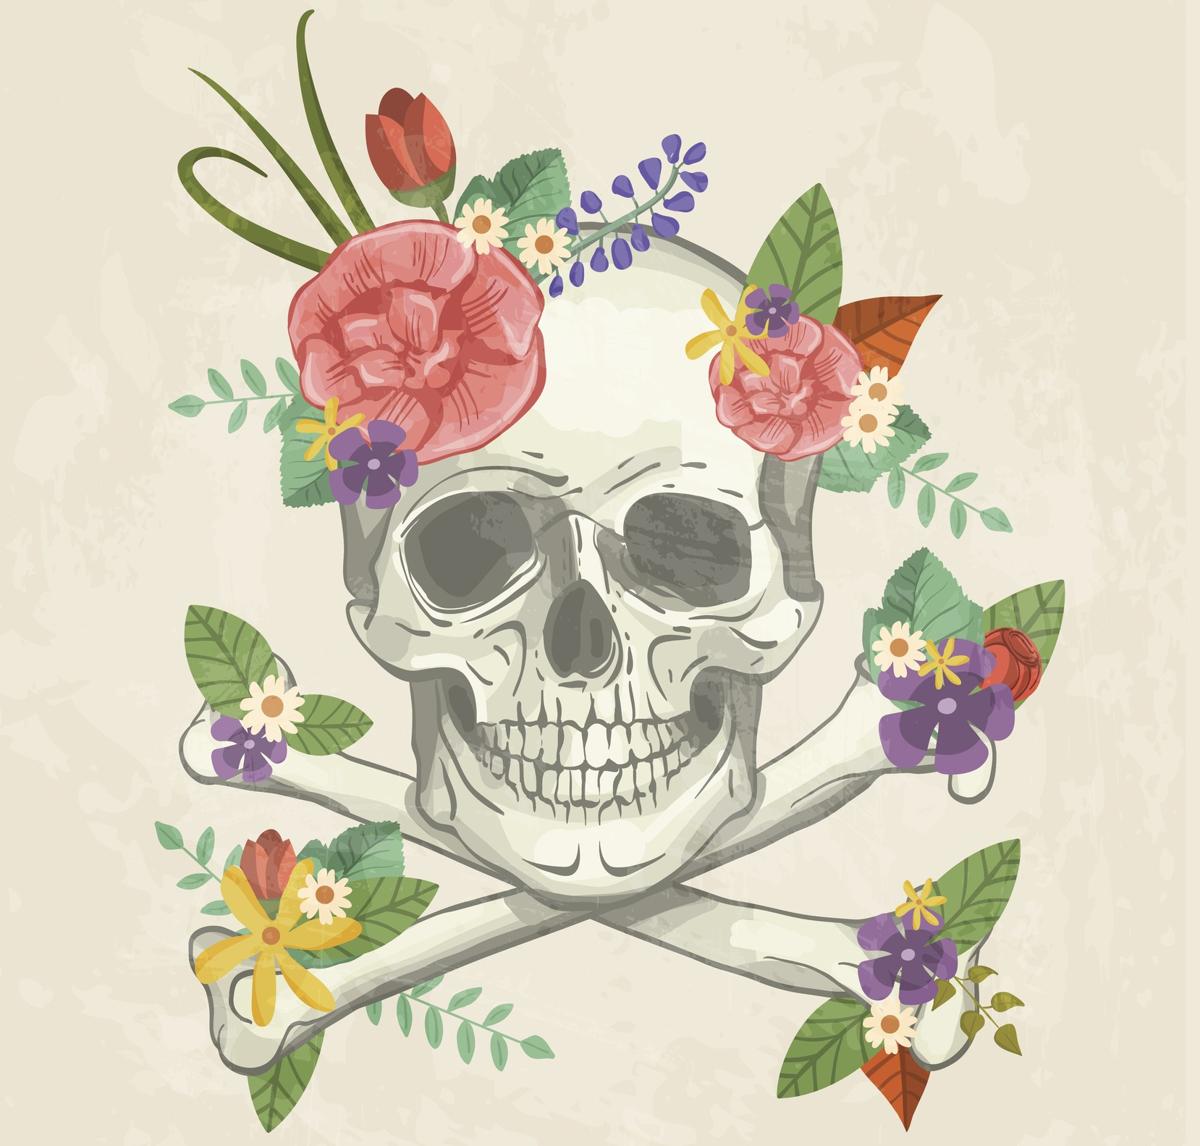 9 Exotic Indian Skull Tattoo Designs and Their Meanings
